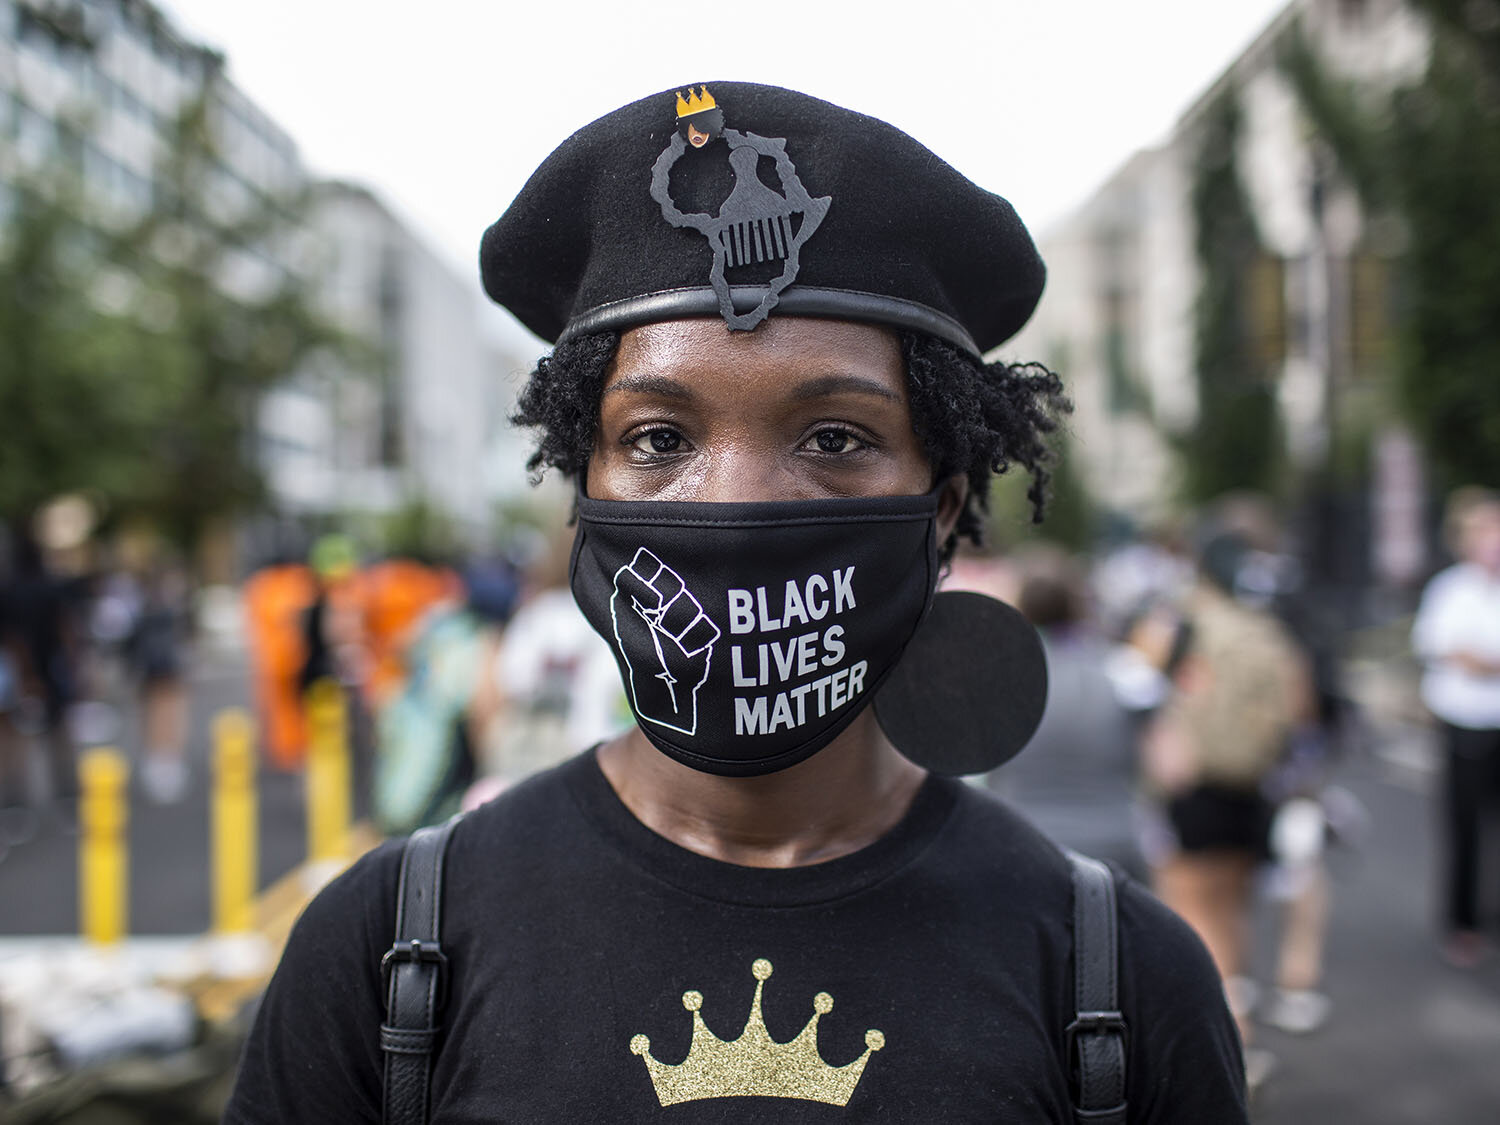  Name:  Schcola Chambers   Age: 33  Occupation: Chief Business Development Officer of 'iRide iPackage LLC'  Date and Place the photo was taken: August 28, 2020, Black Lives Matter Plaza, Washington DC   Her Statement:  "I came all the way from Miami,